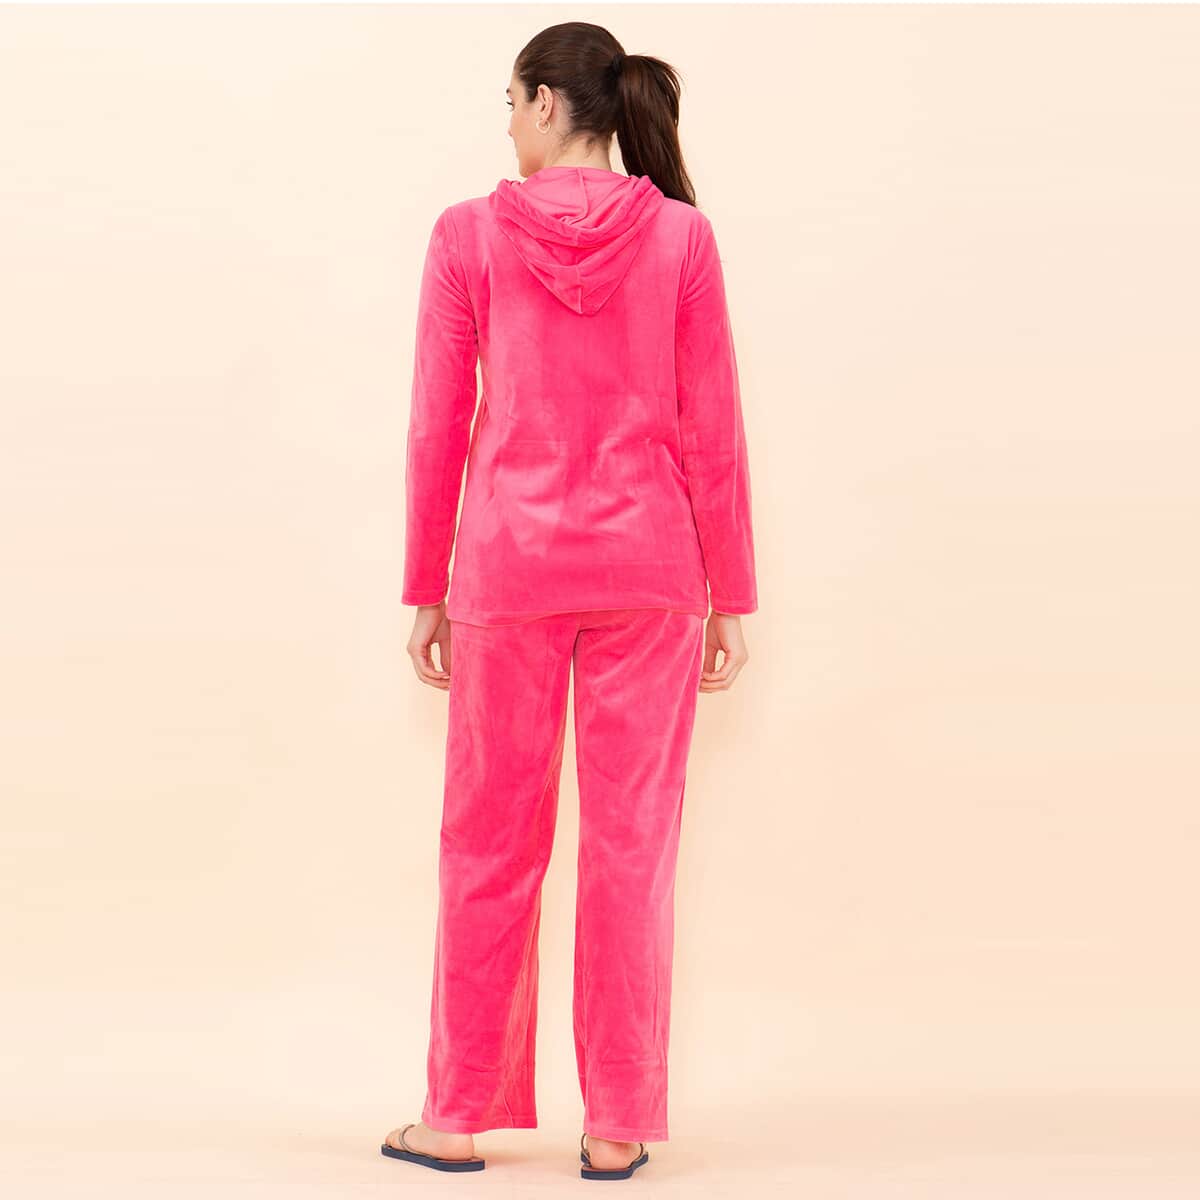 Tamsy LUX Pink Velour Track Suit Set - 1X image number 1